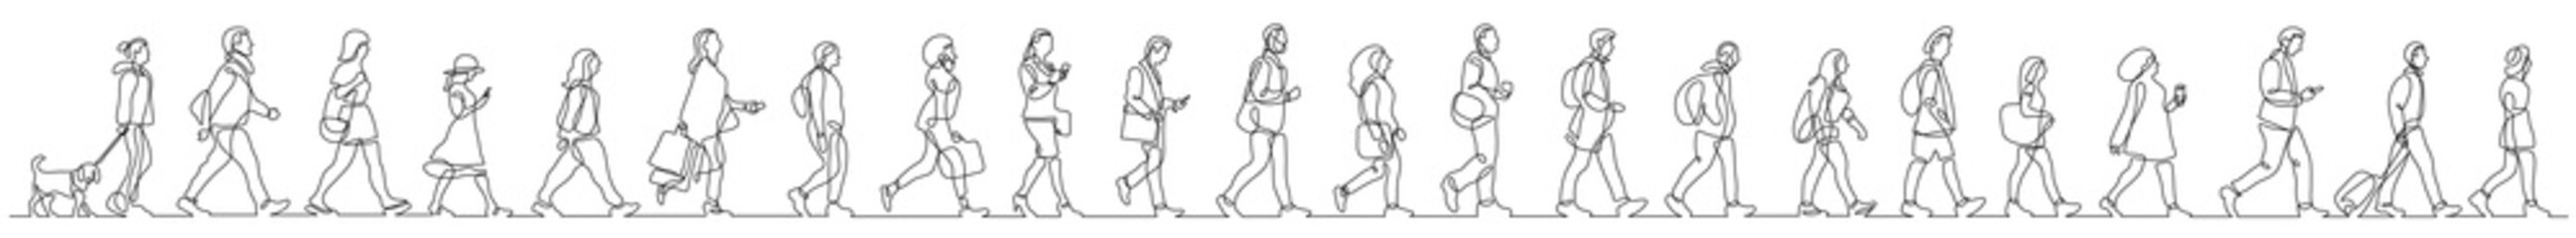 continuous line drawing of group of diverse people walking on street